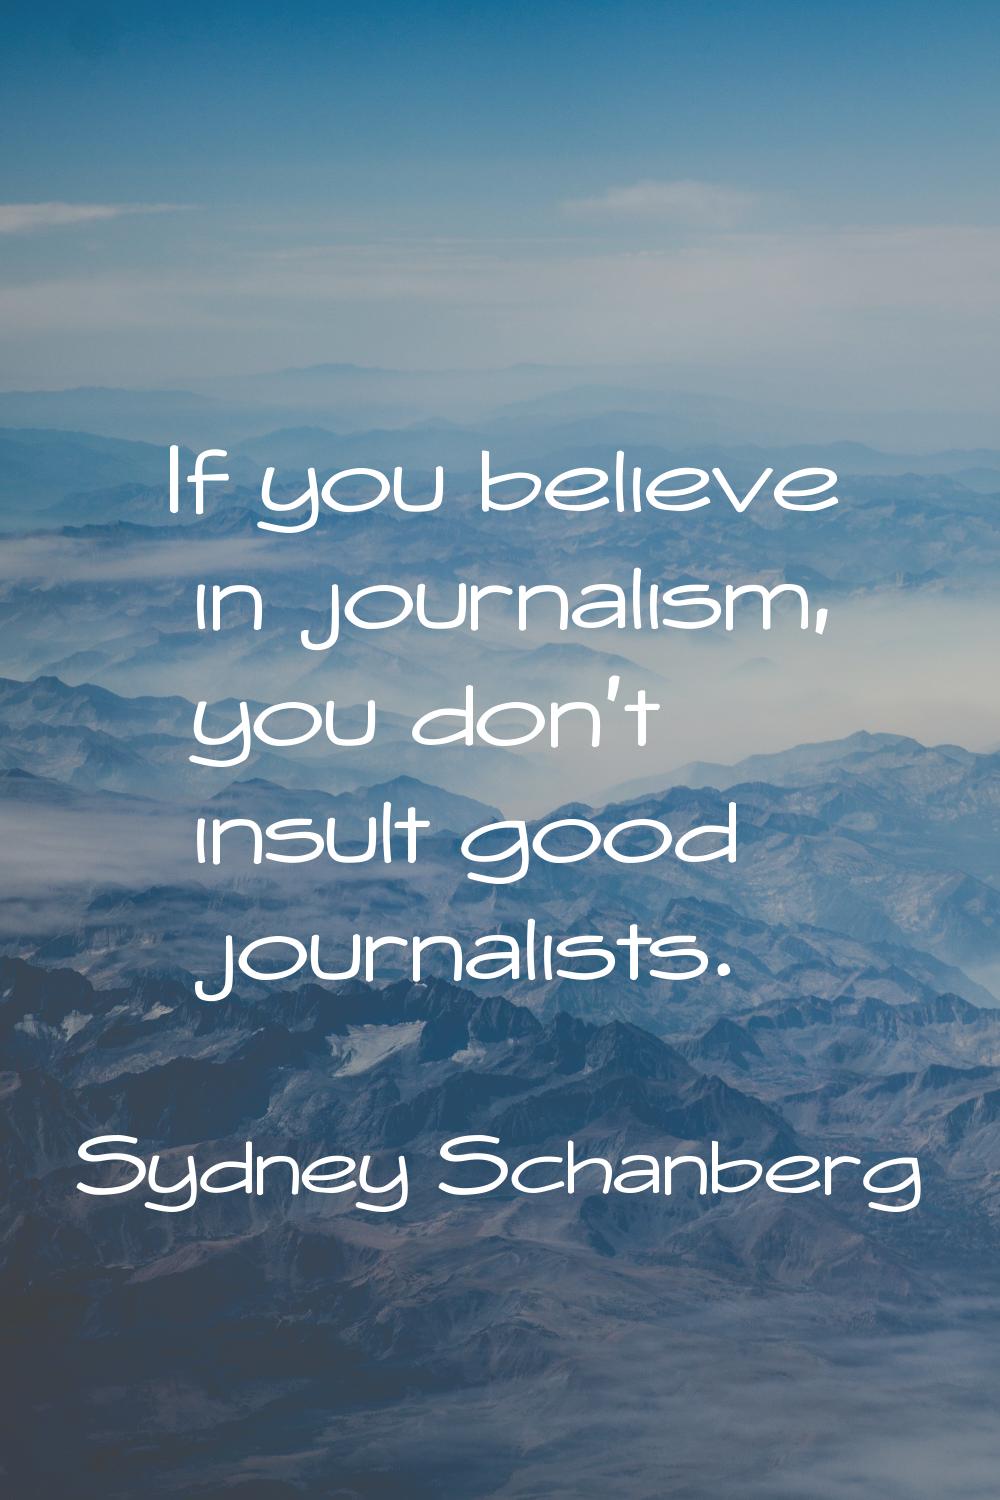 If you believe in journalism, you don't insult good journalists.